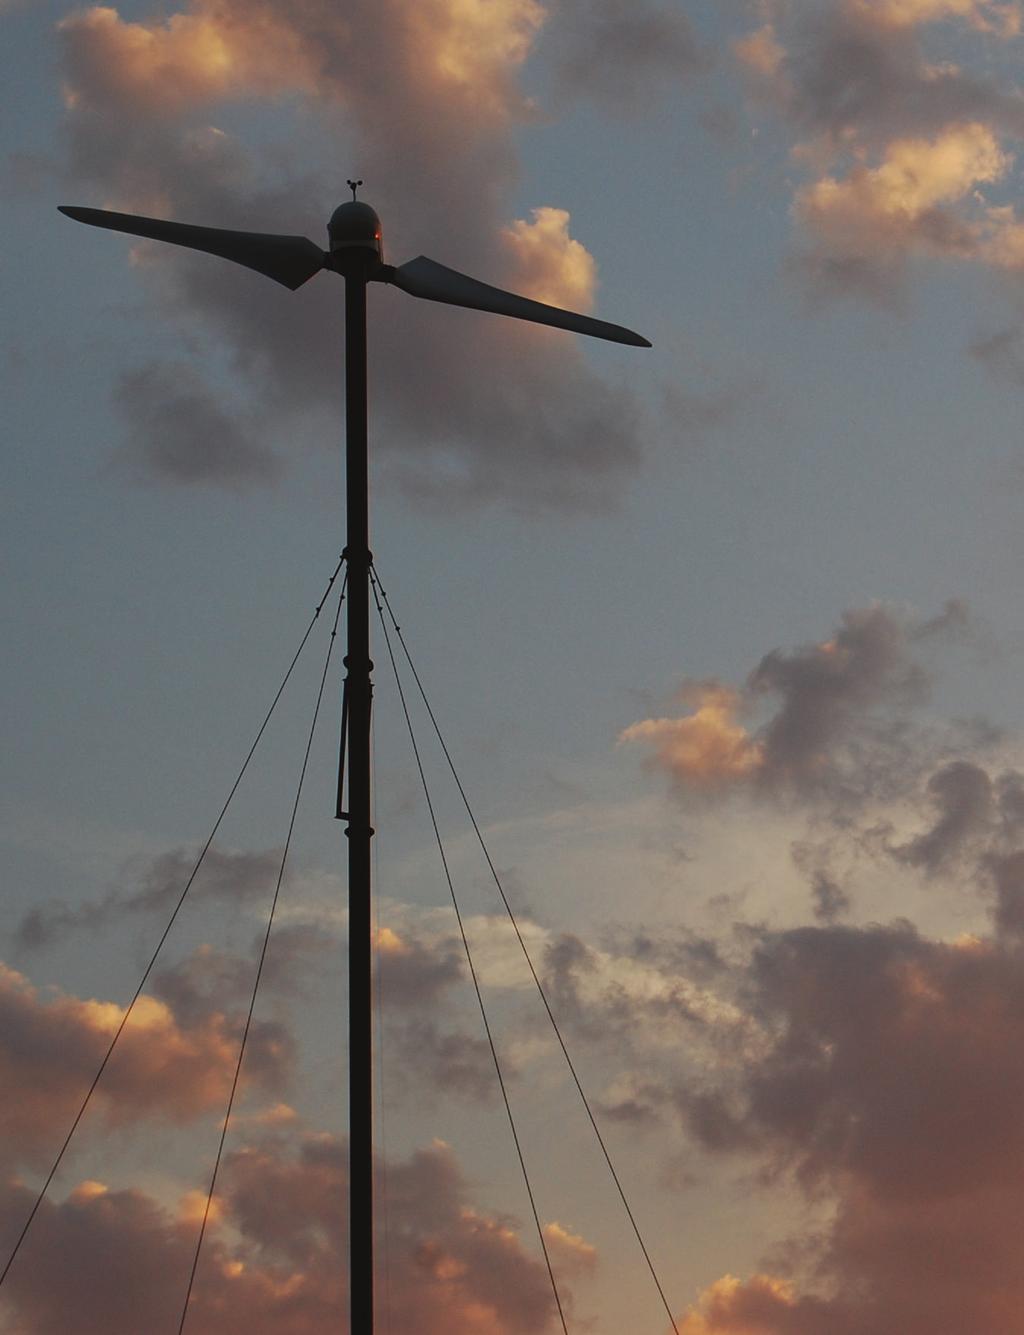 A SIMPLE AND AFFORDABLE WIND SYSTEM FOR YOUR HOME, FARM, BUSINESS OR WINDFARM A Few of the Many Reasons for Choosing Aerostar A history of performance dating back to 1980.